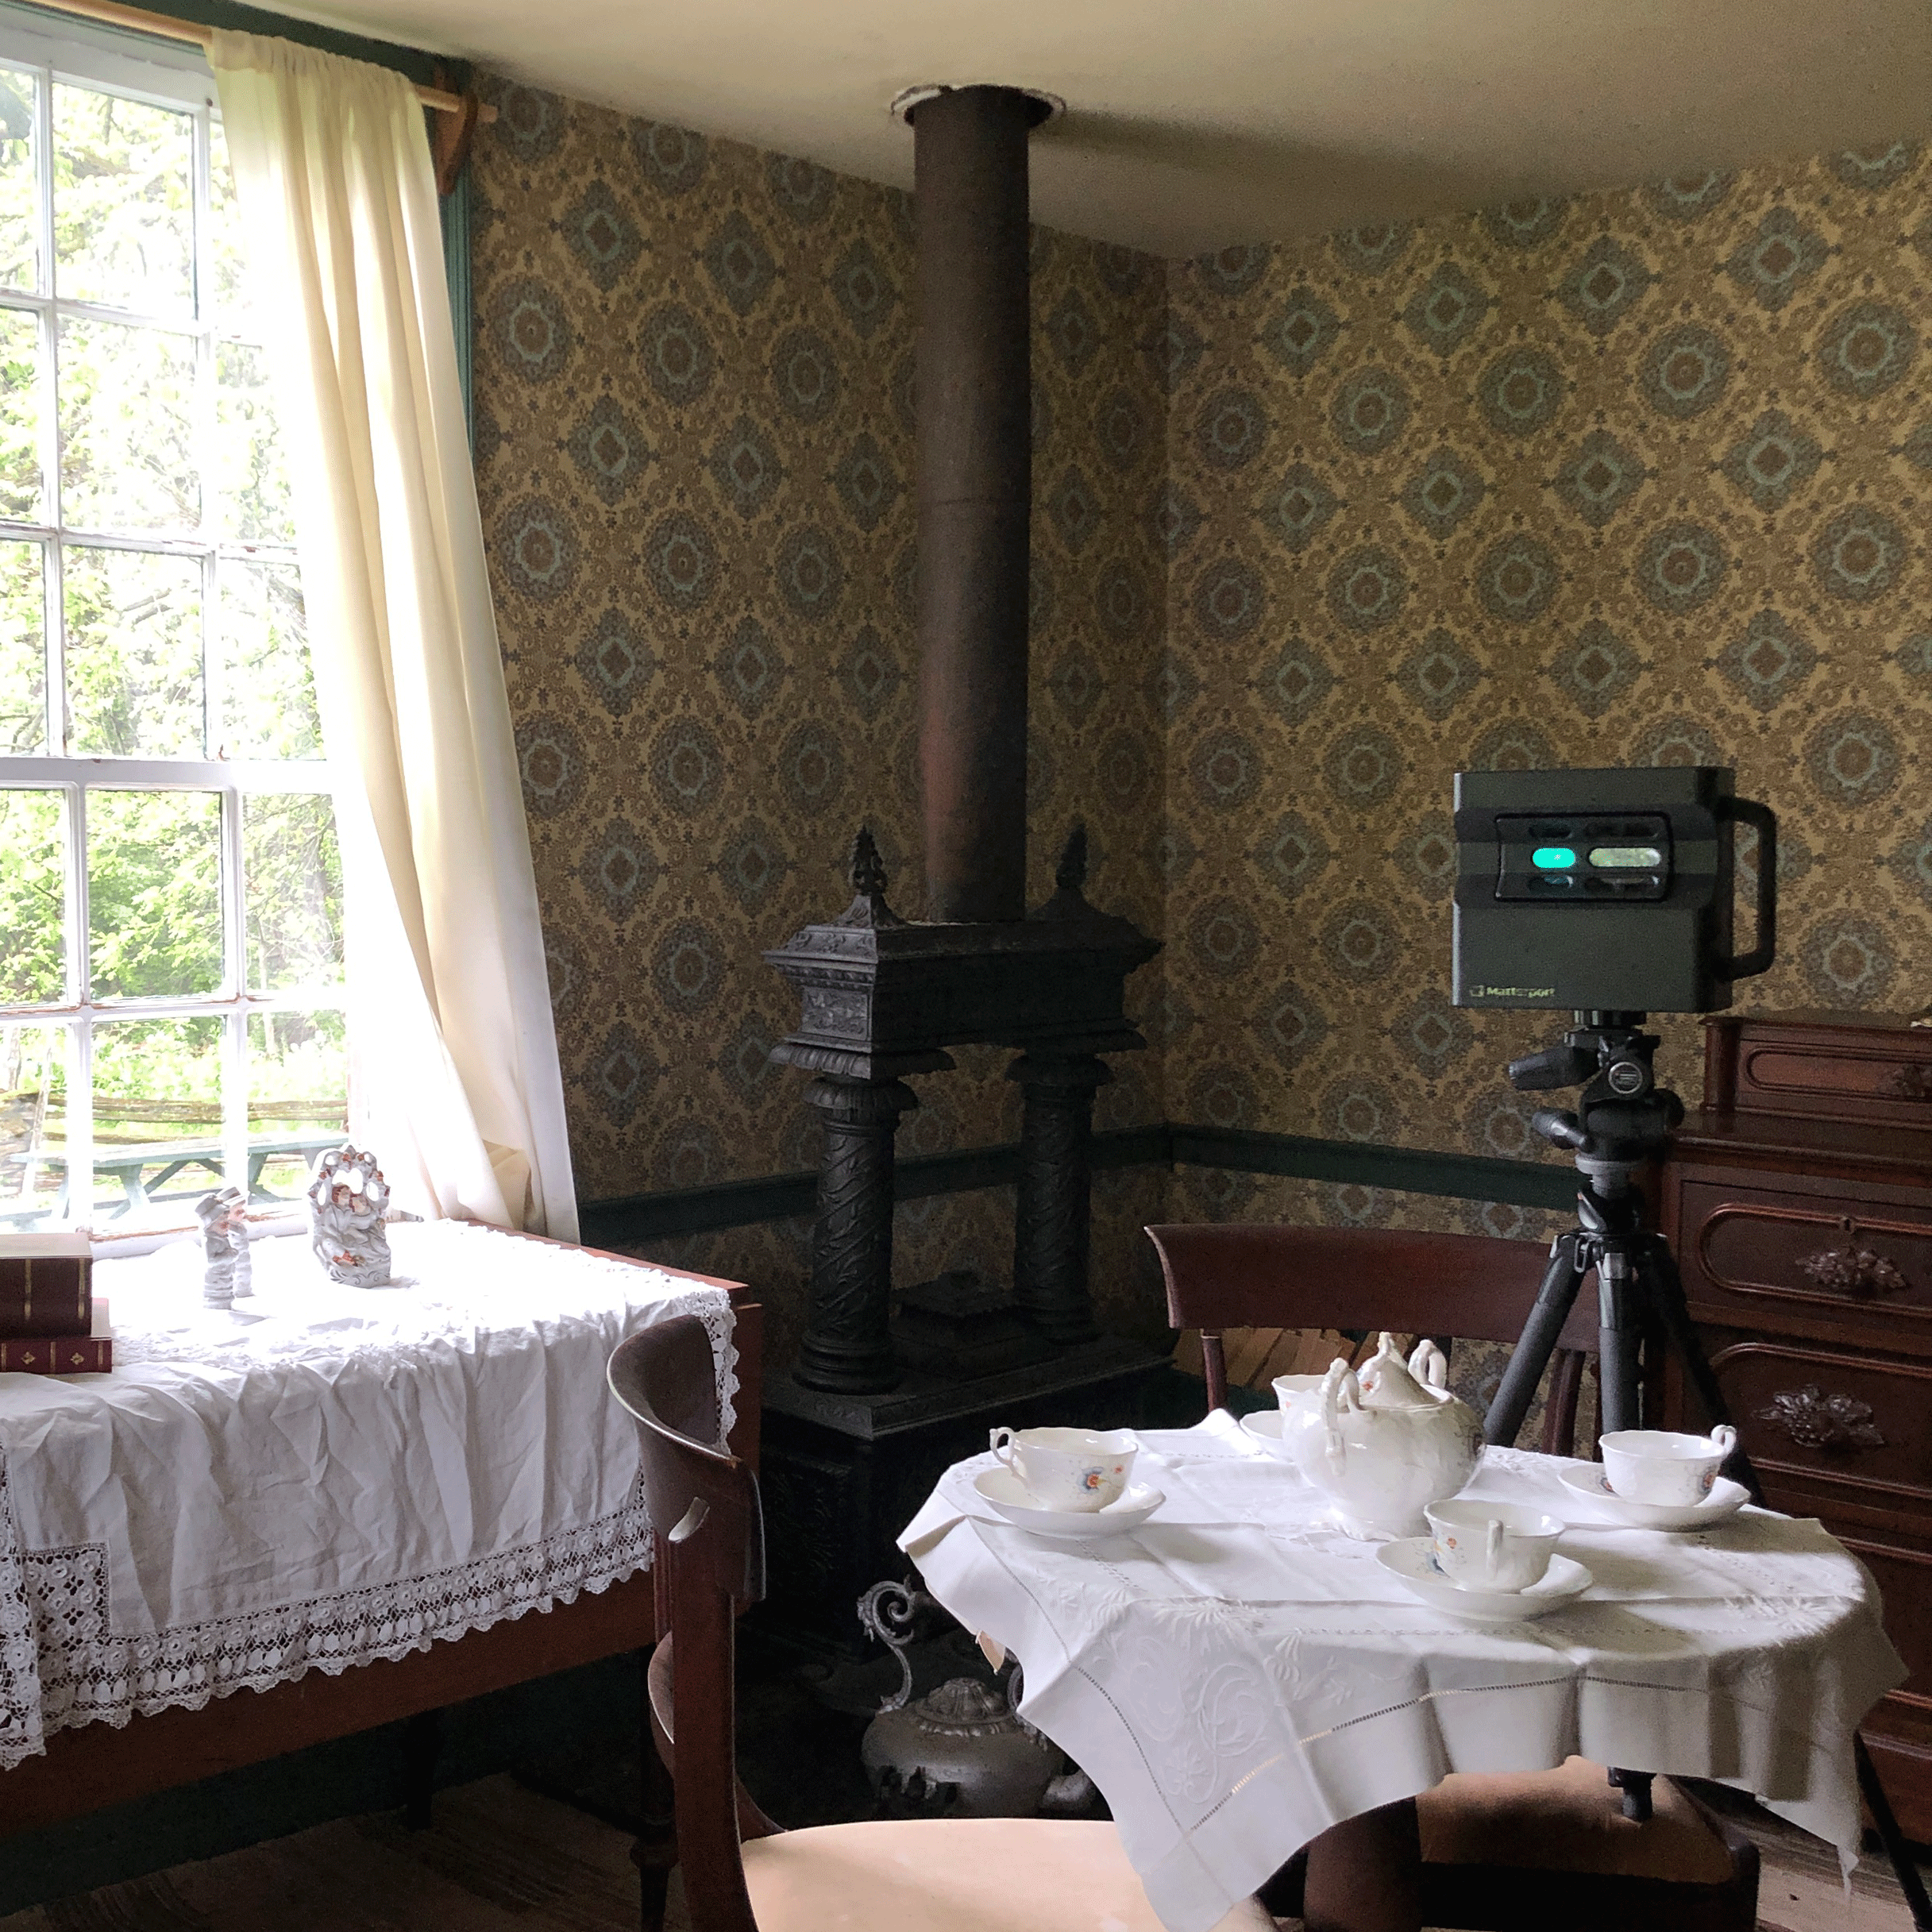 Matty The Matterport Pro2 Camera sitting at a old fashioned dining table in a museum